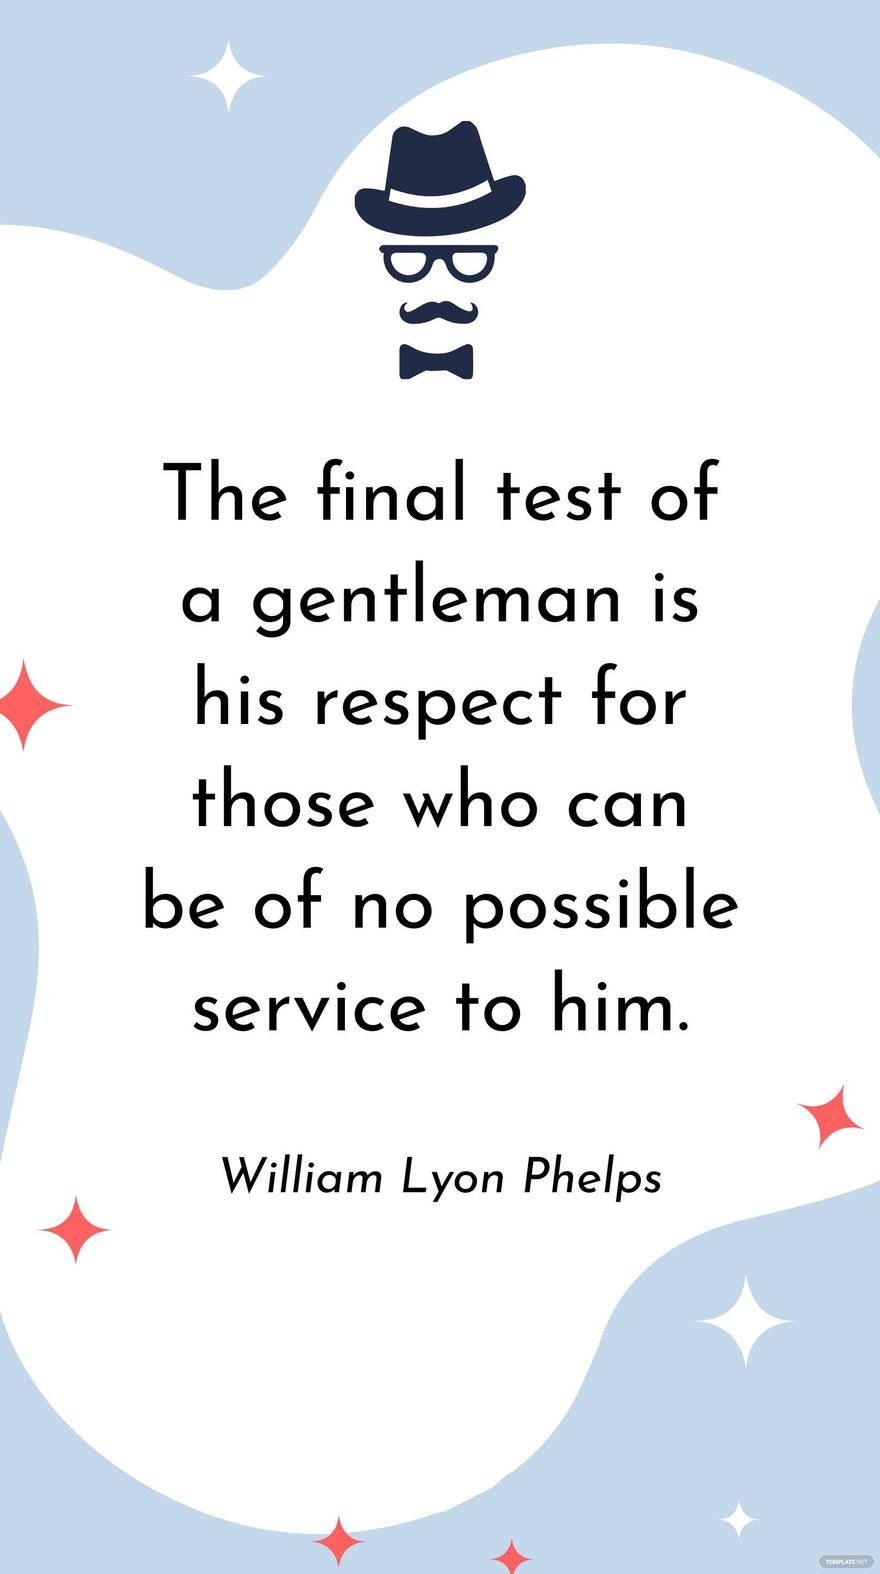 William Lyon Phelps - The final test of a gentleman is his respect for those who can be of no possible service to him.